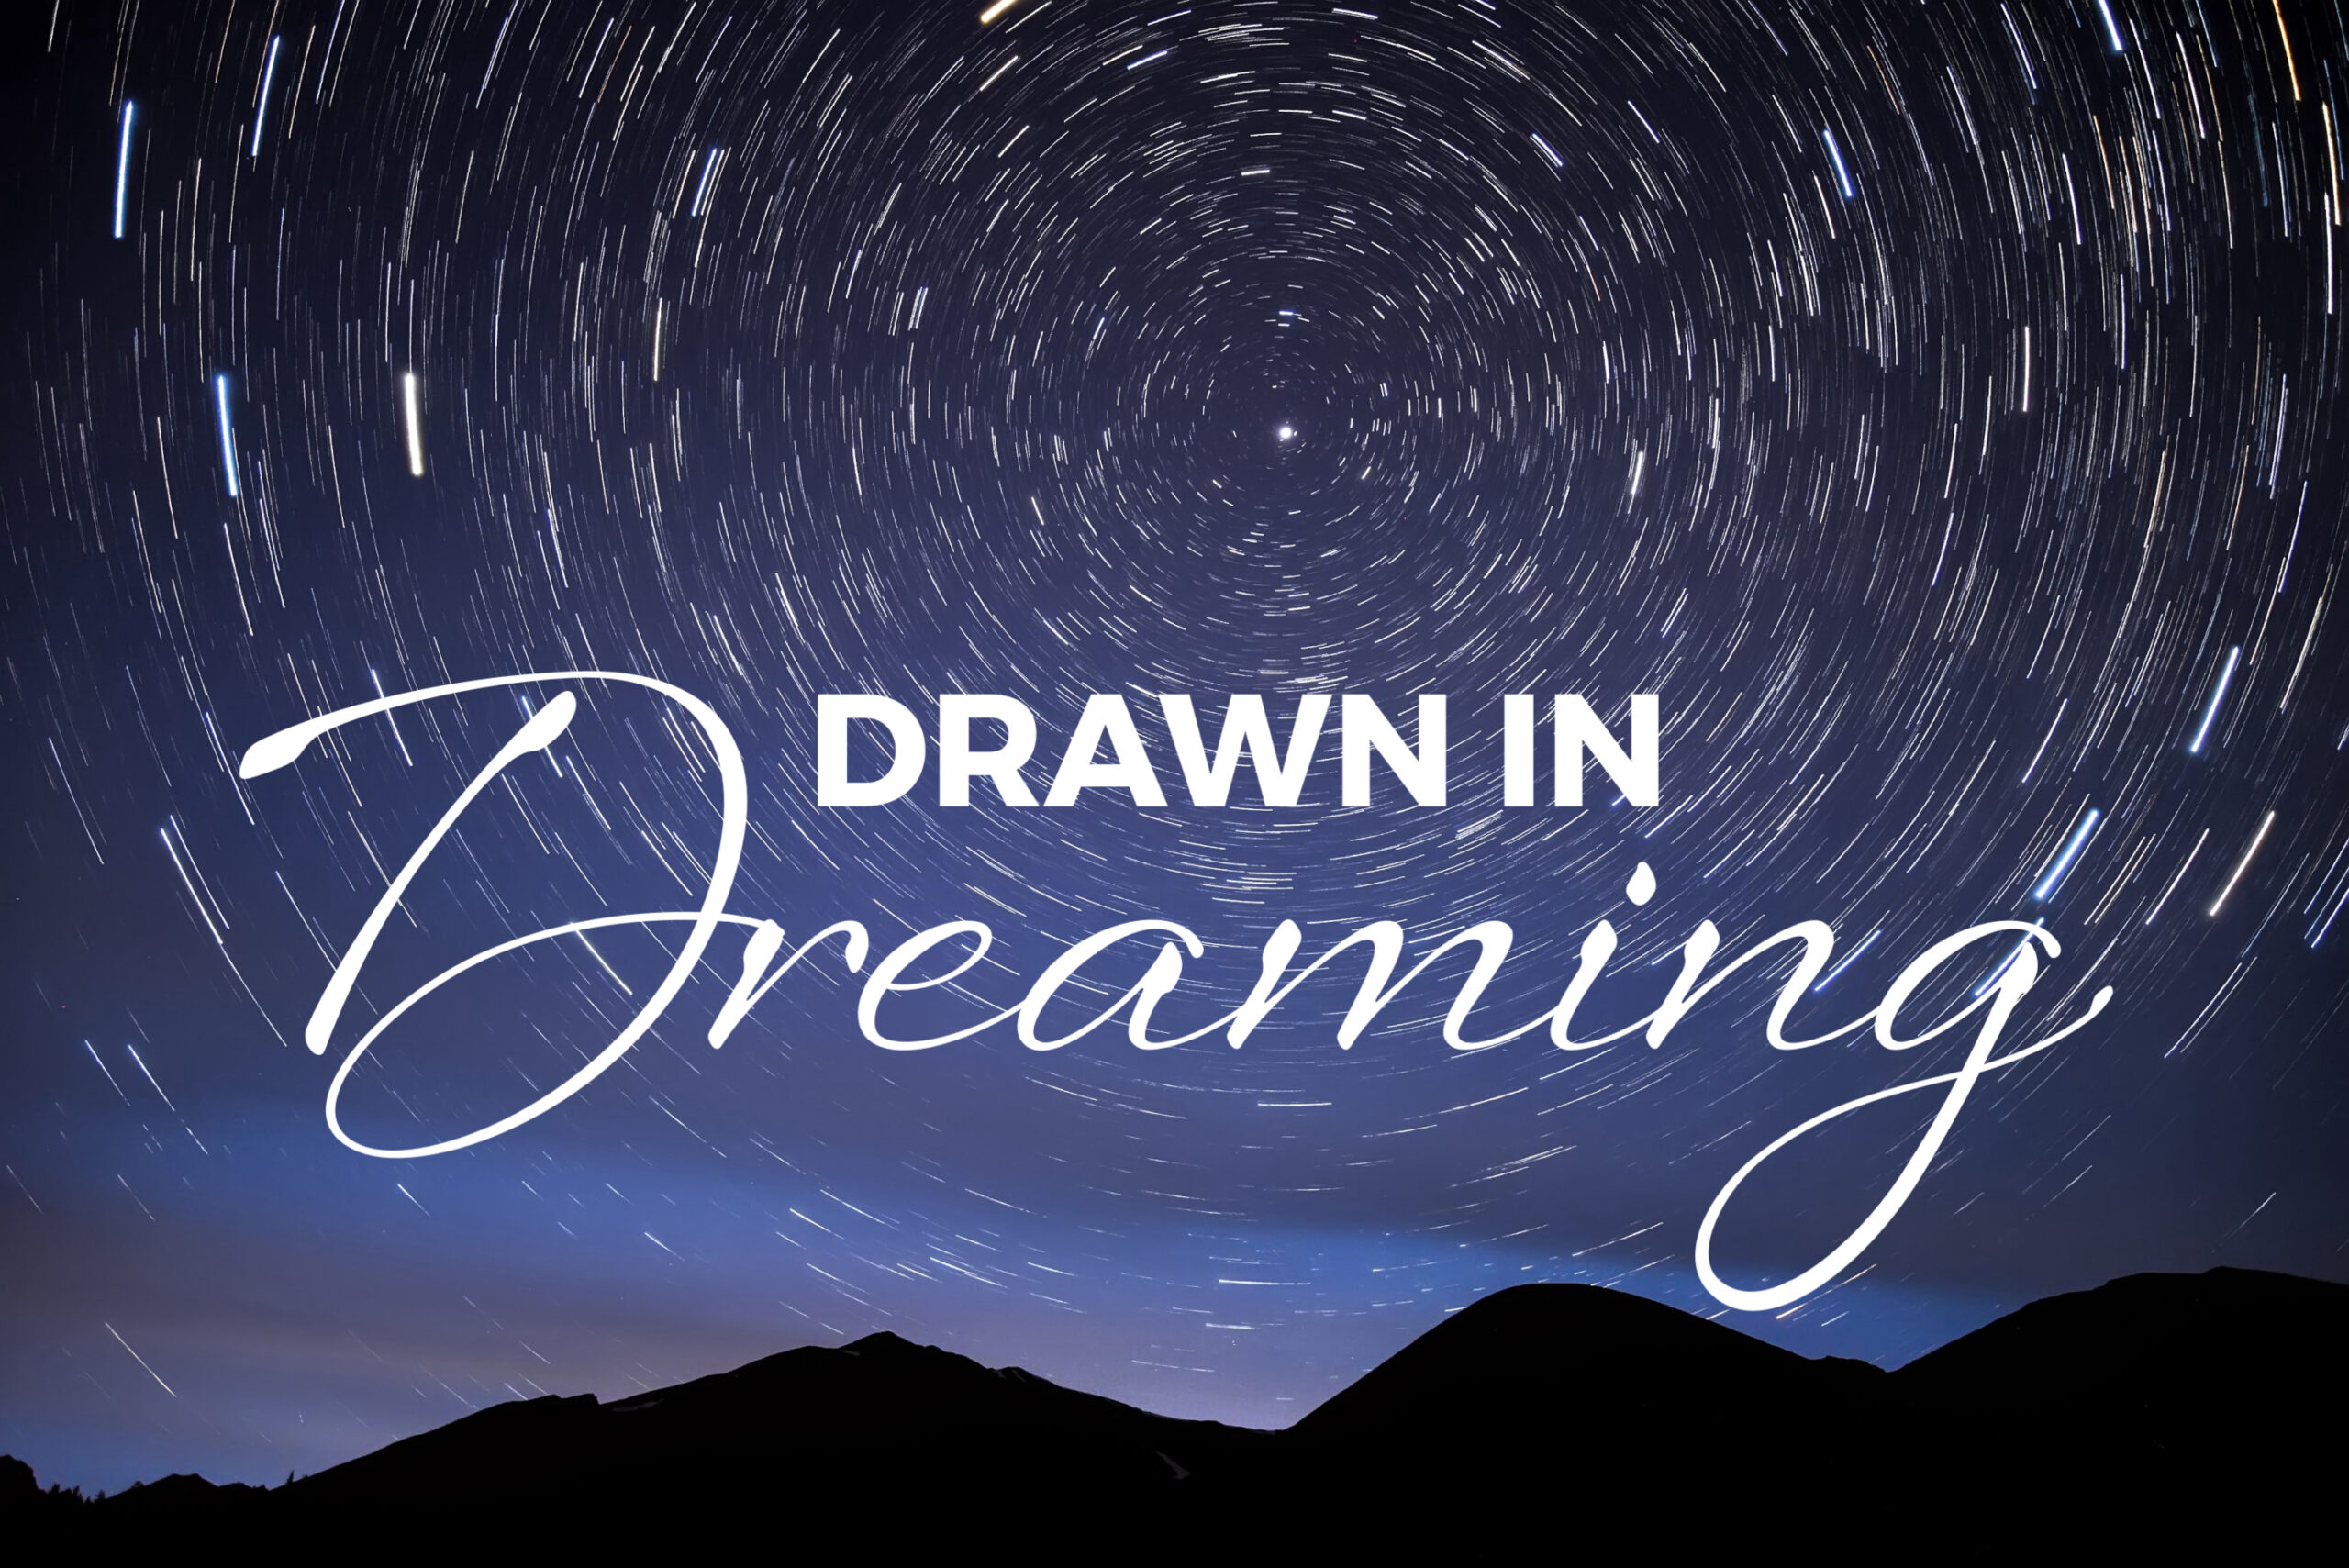 Drawn In: Dreaming